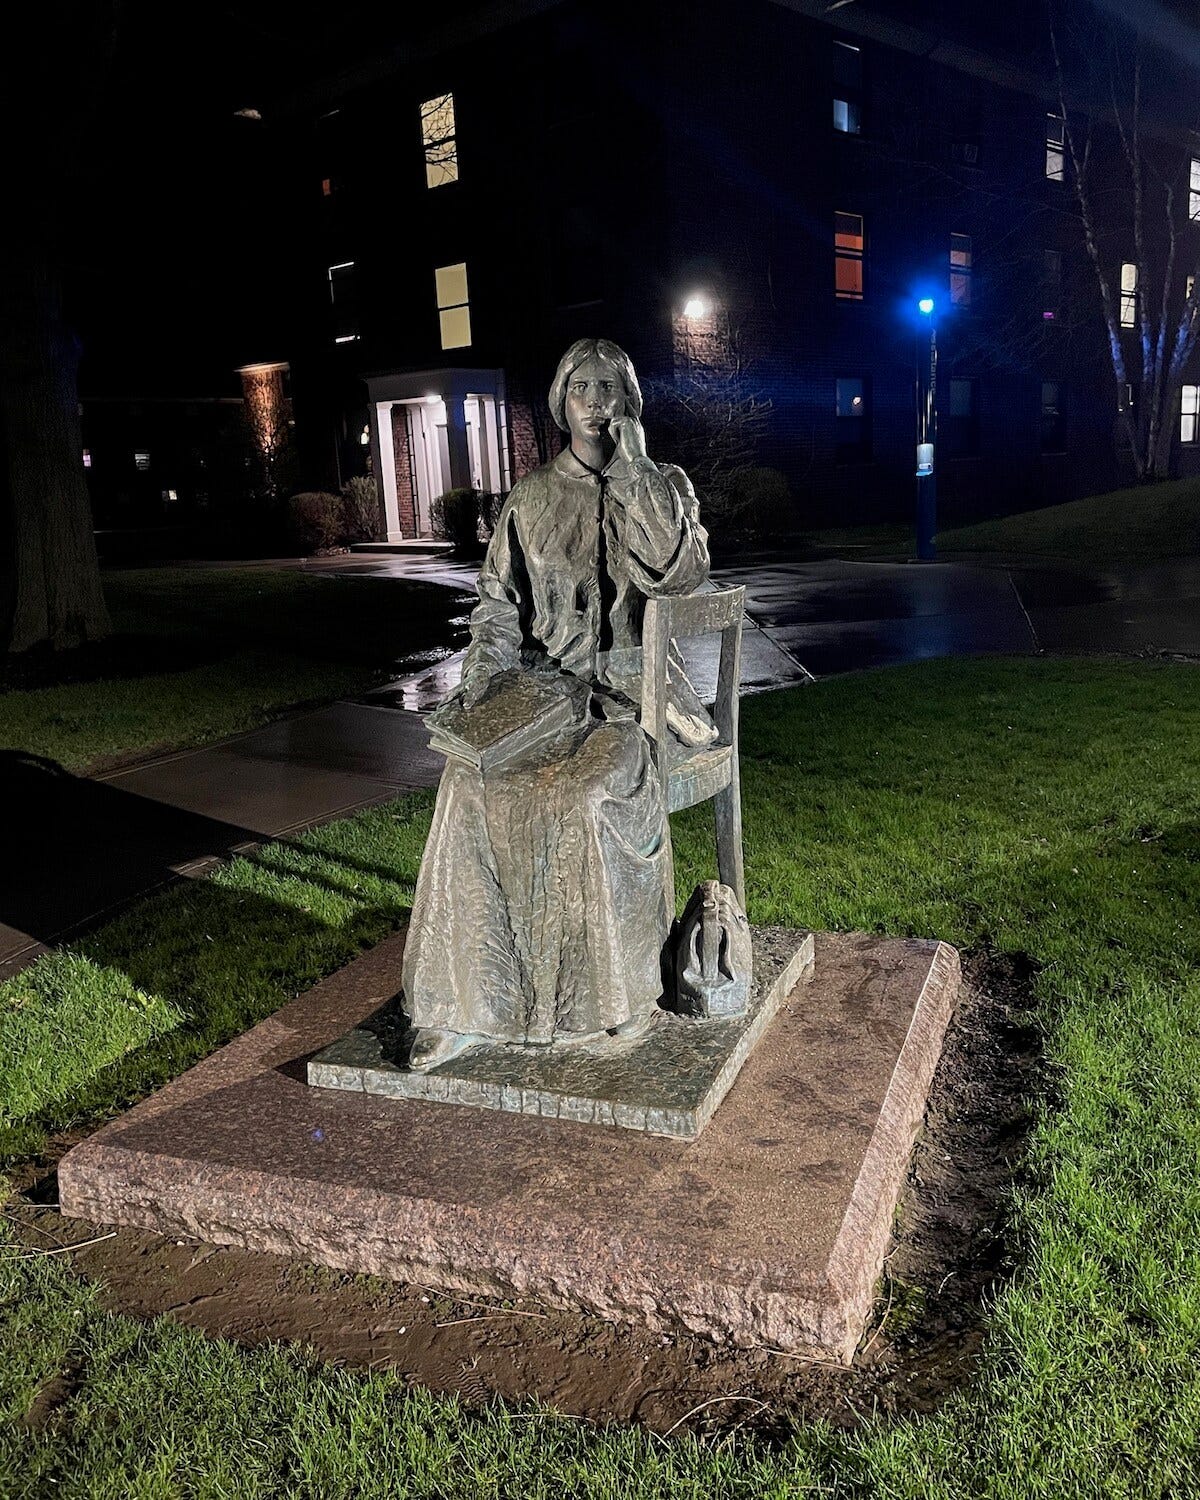 The Elizabeth Blackwell statue at HWS, at night. Elizabeth is sitting sideways on a wooden chair, book in her lap, and medical bag at her feet. Her elbow rests on the back of the chair, her chin on her her elbow, looking pensive.